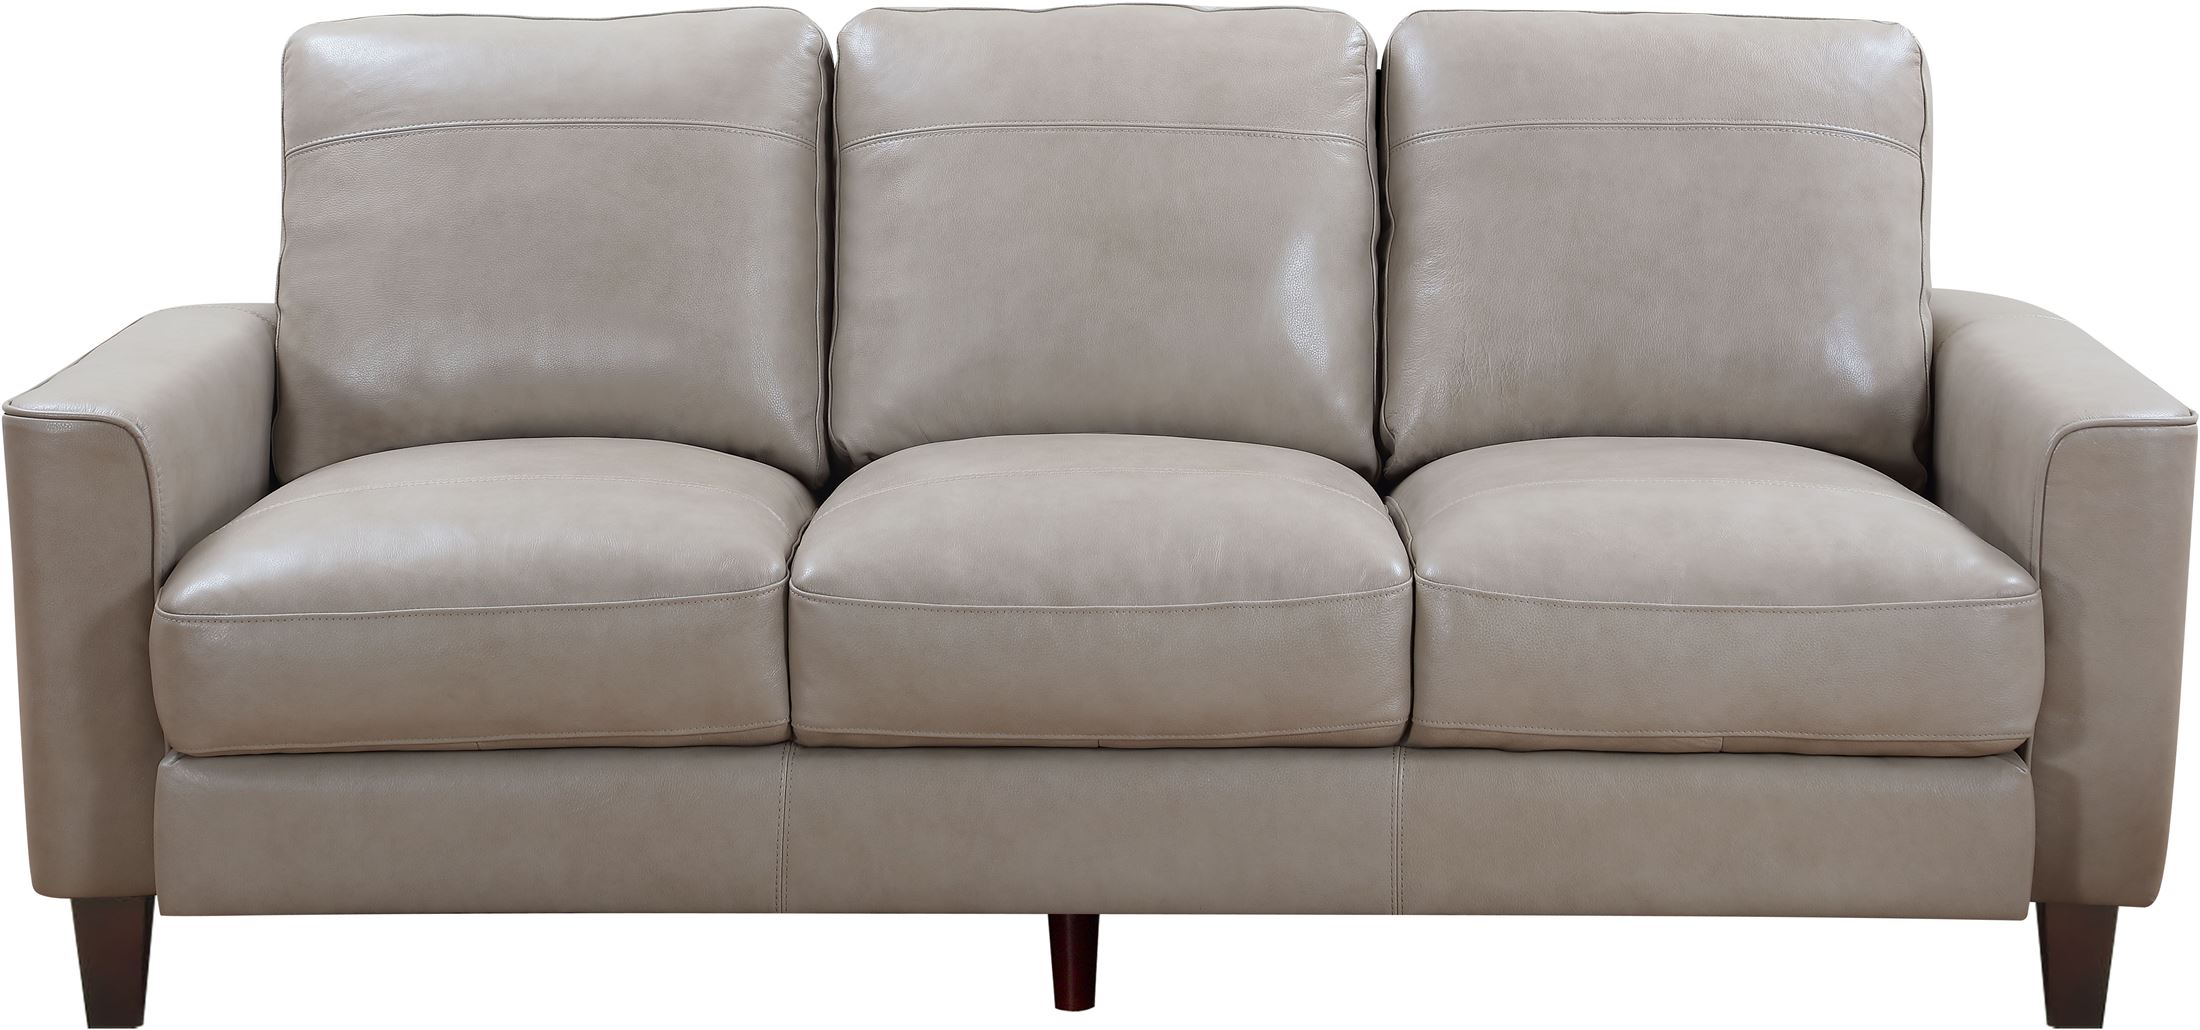 georgetowne collection leather sofa